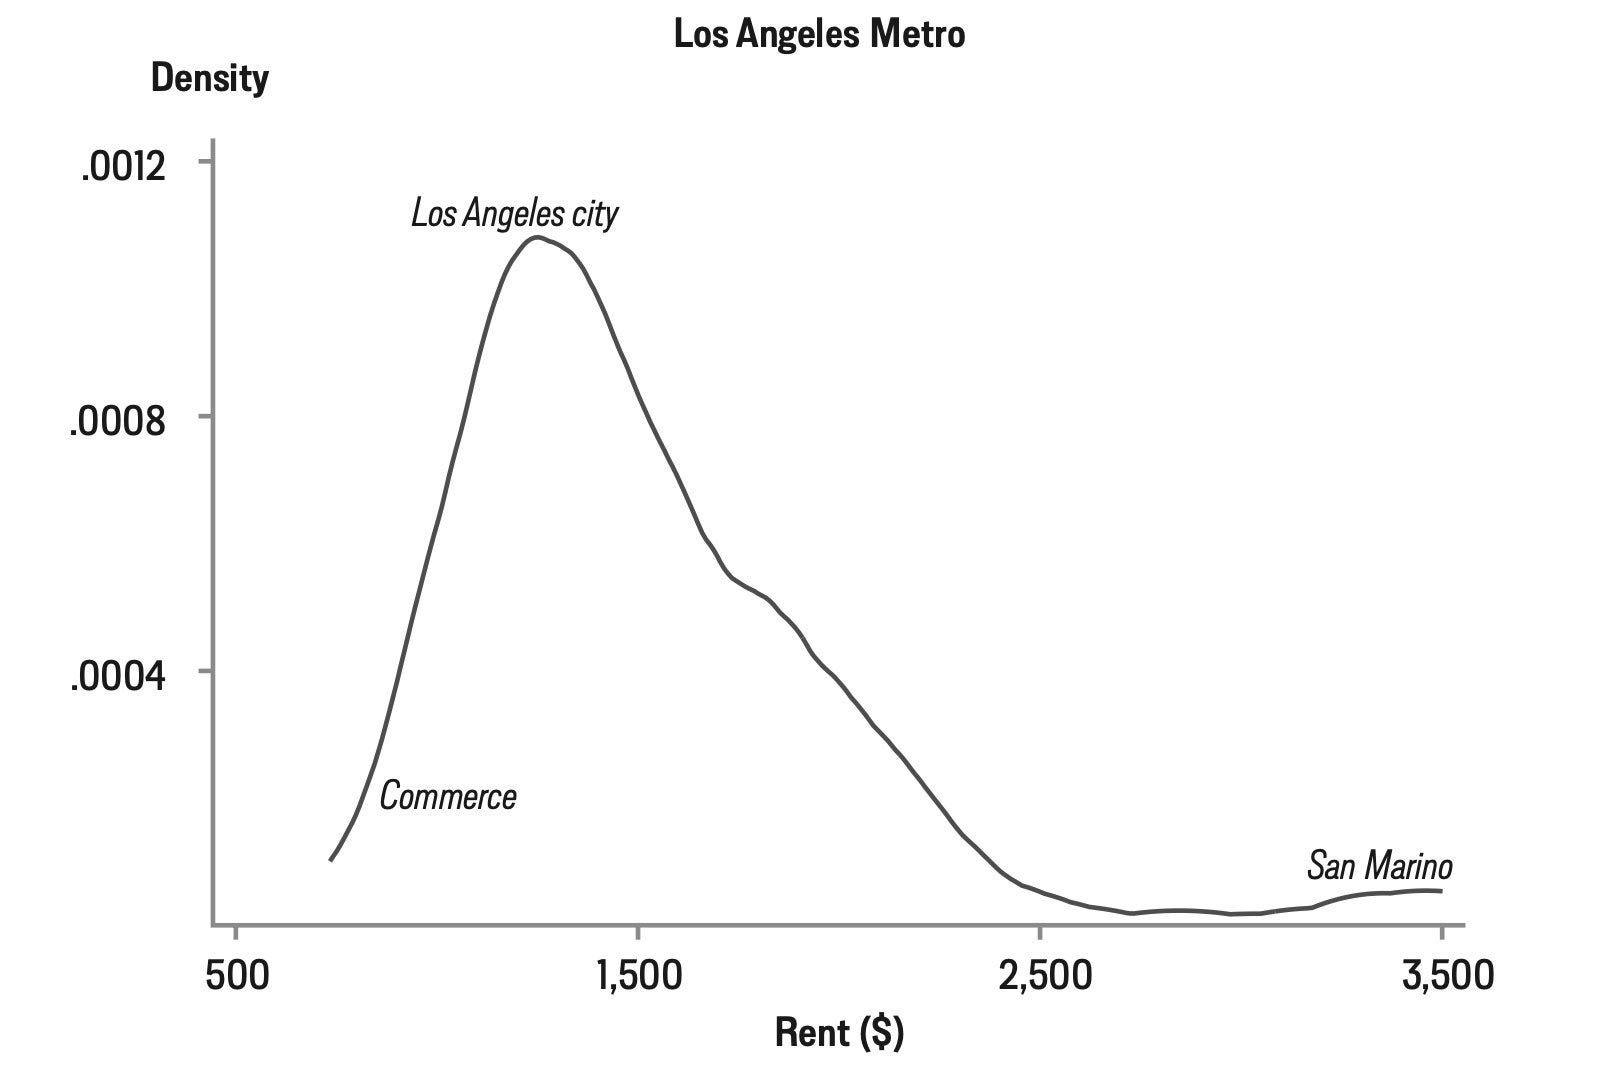 A curve showing the density of housing in L.A. neighborhoods vs. rent.